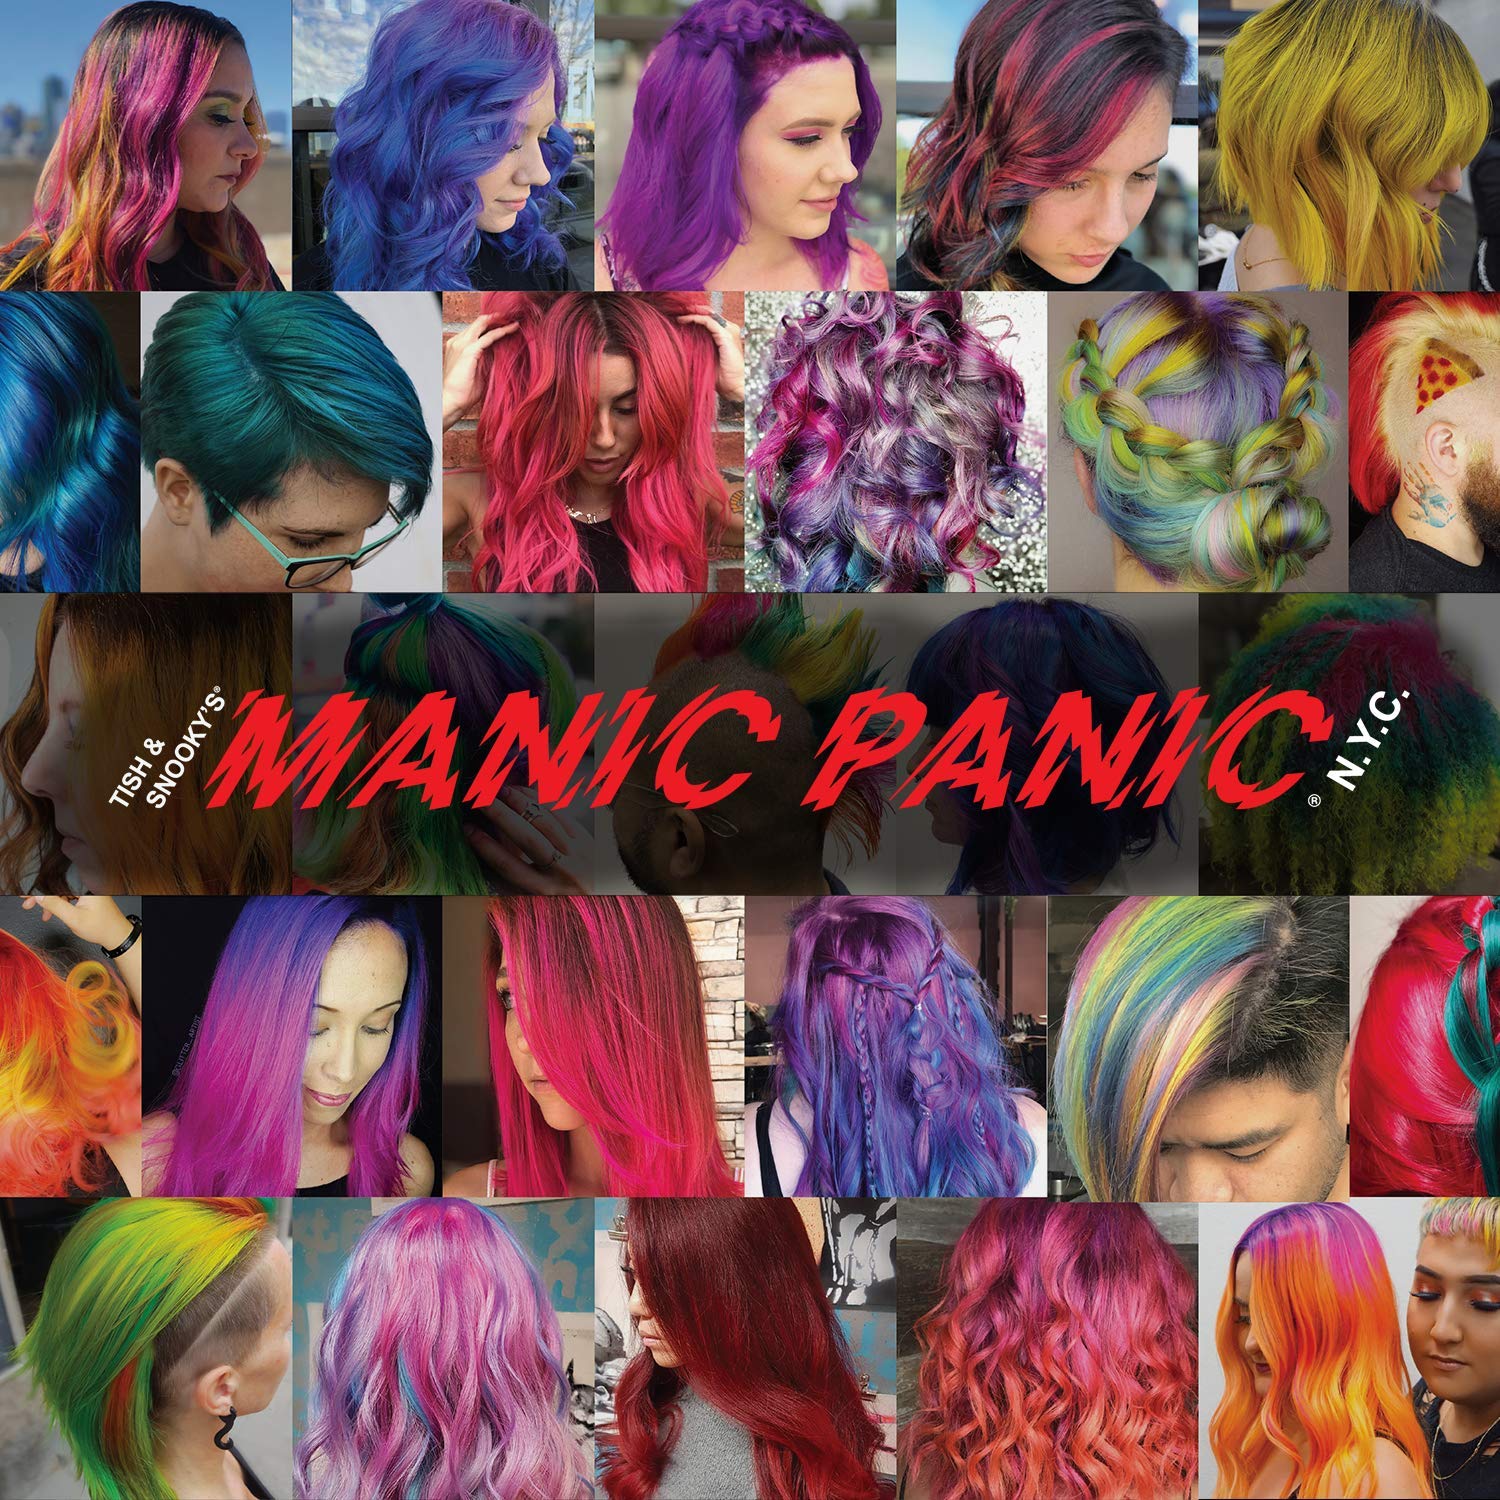 MANIC PANIC Cotton Candy Pink Hair Color Spray - (Amplified) - Bright, Vivid Temporary Pink Hair Dye - Sprays On Instantly & Washes Out (3.4oz) - Vegan Hair Dye For Adults & Kids of All Hair Types